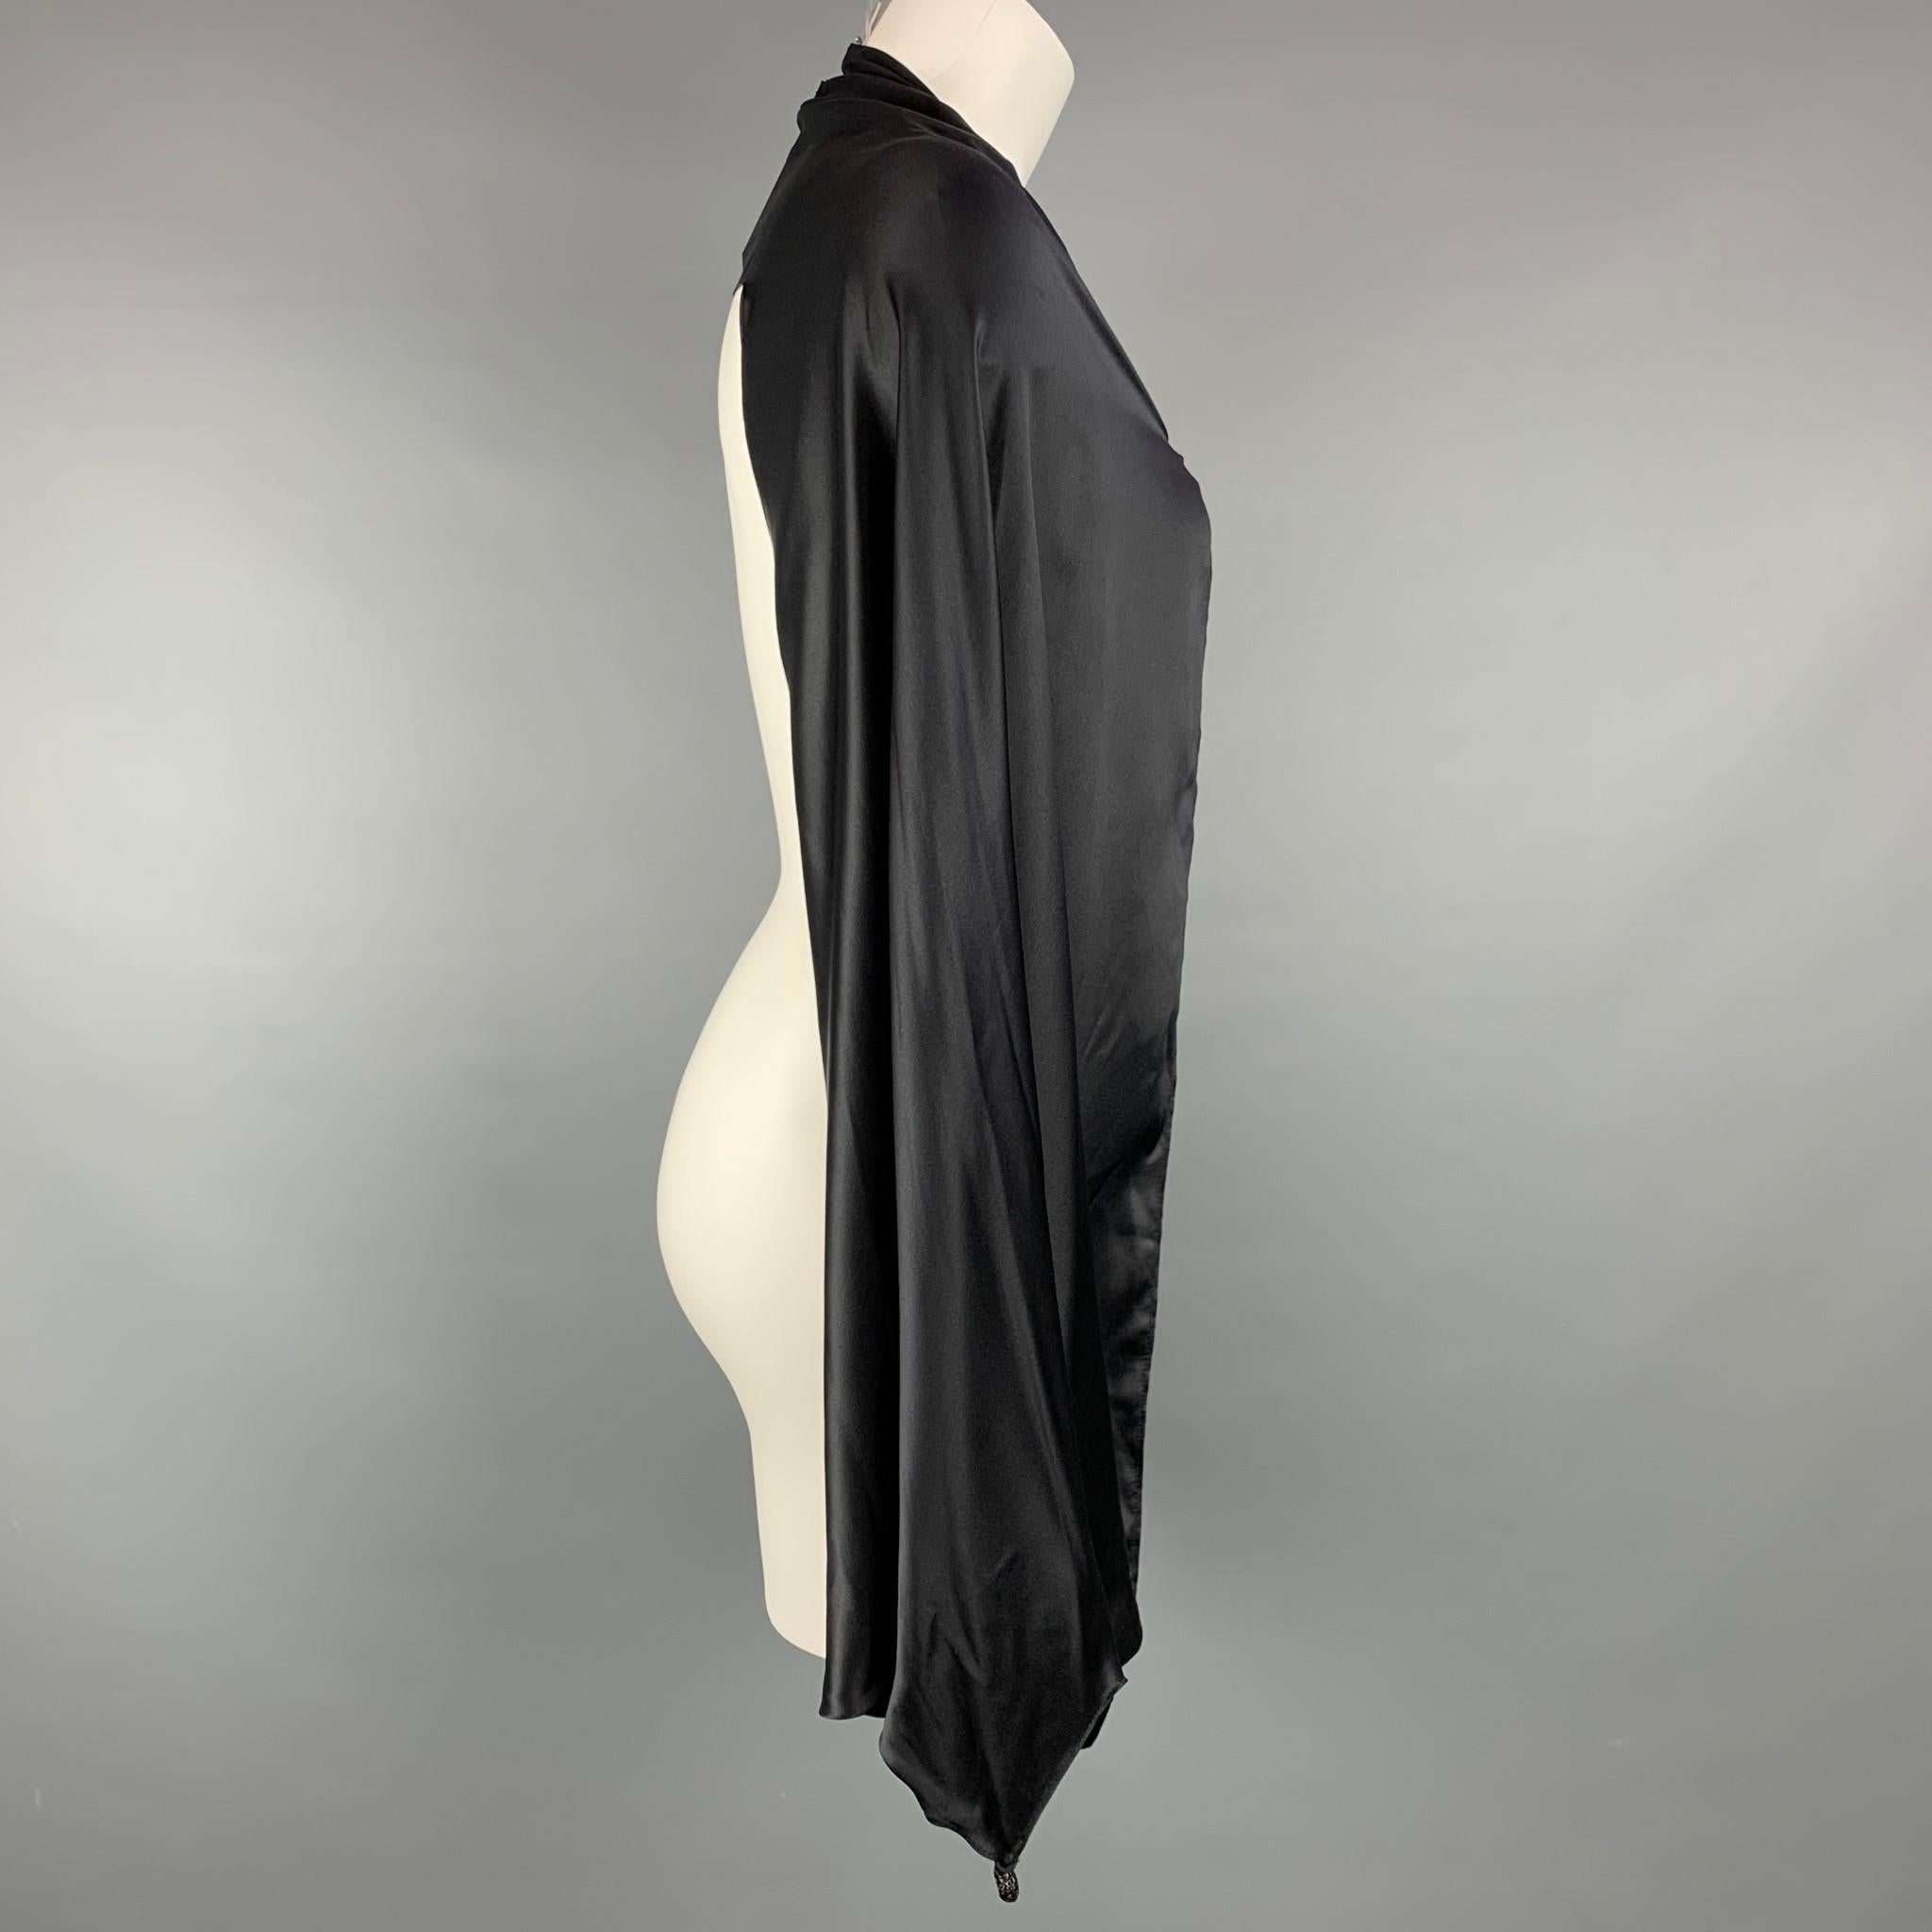 JEAN PAUL GAULTIER sleeves comes in a black satin featuring a oversized style with a buttoned closure. Made in Italy.

Very Good Pre-Owned Condition.
Marked: No size marked

Measurements:

Sleeve: 29.5 in.
